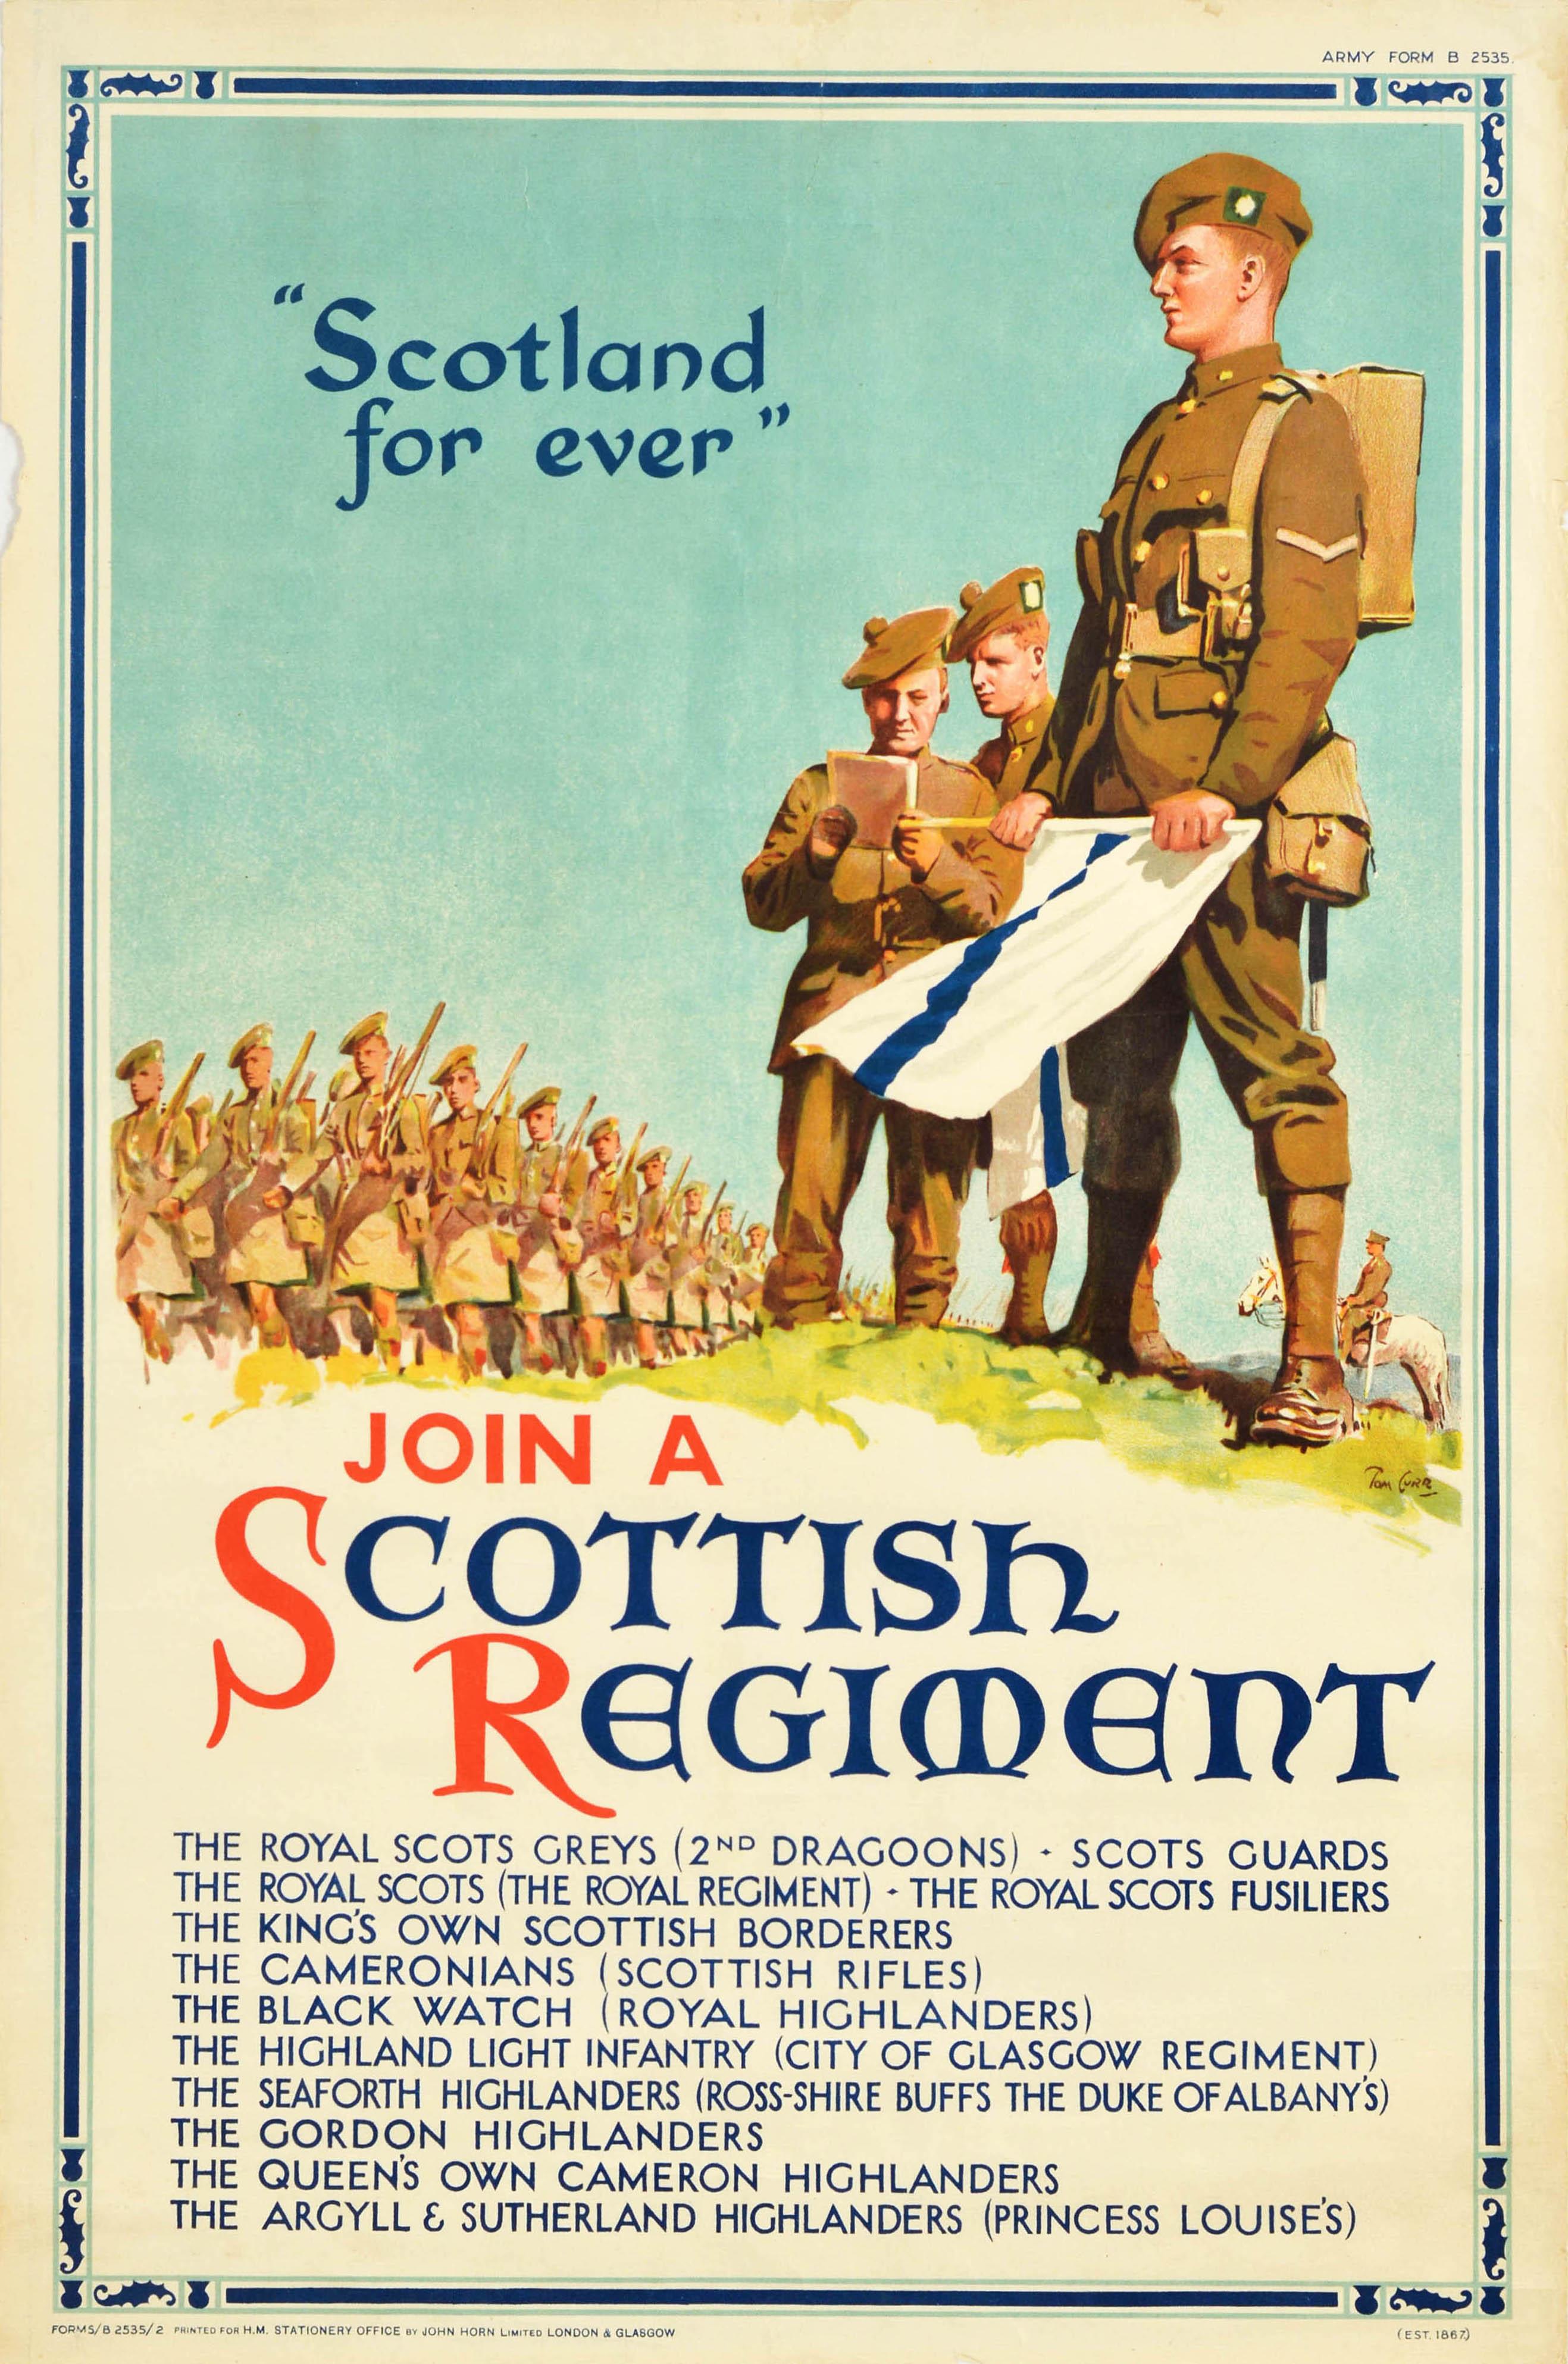 Tom Curr Print - Original Vintage Military Army Poster Join A Scottish Regiment Scotland For Ever